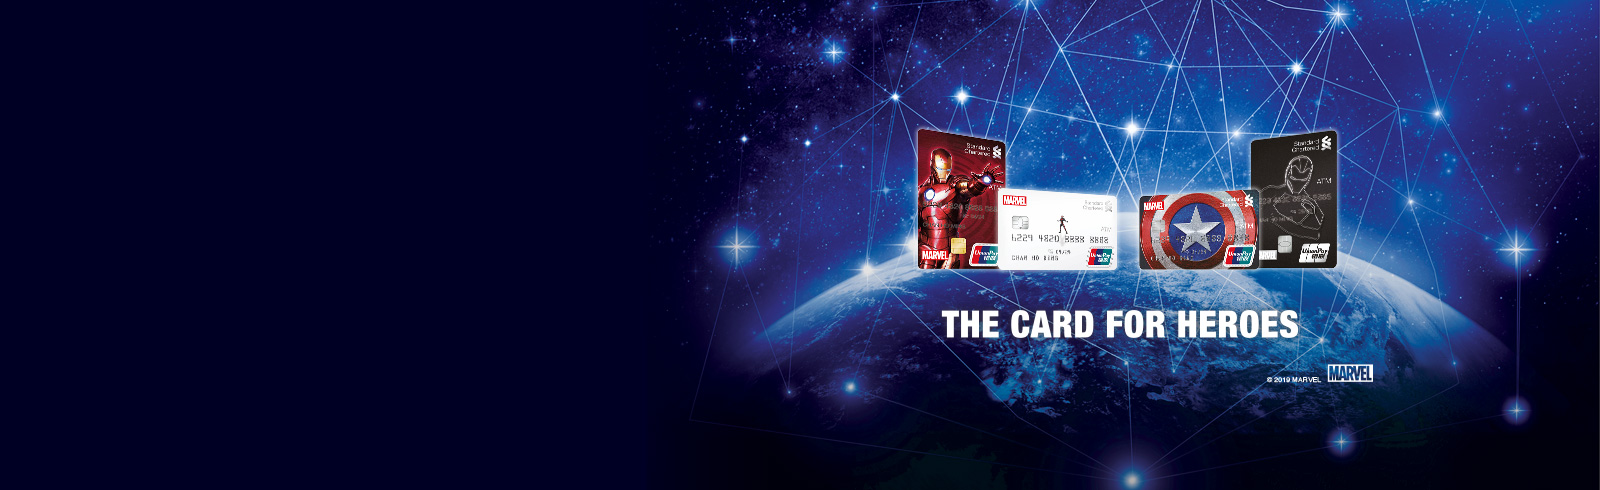 Marvel ATM cards with slogan "The card for heros"